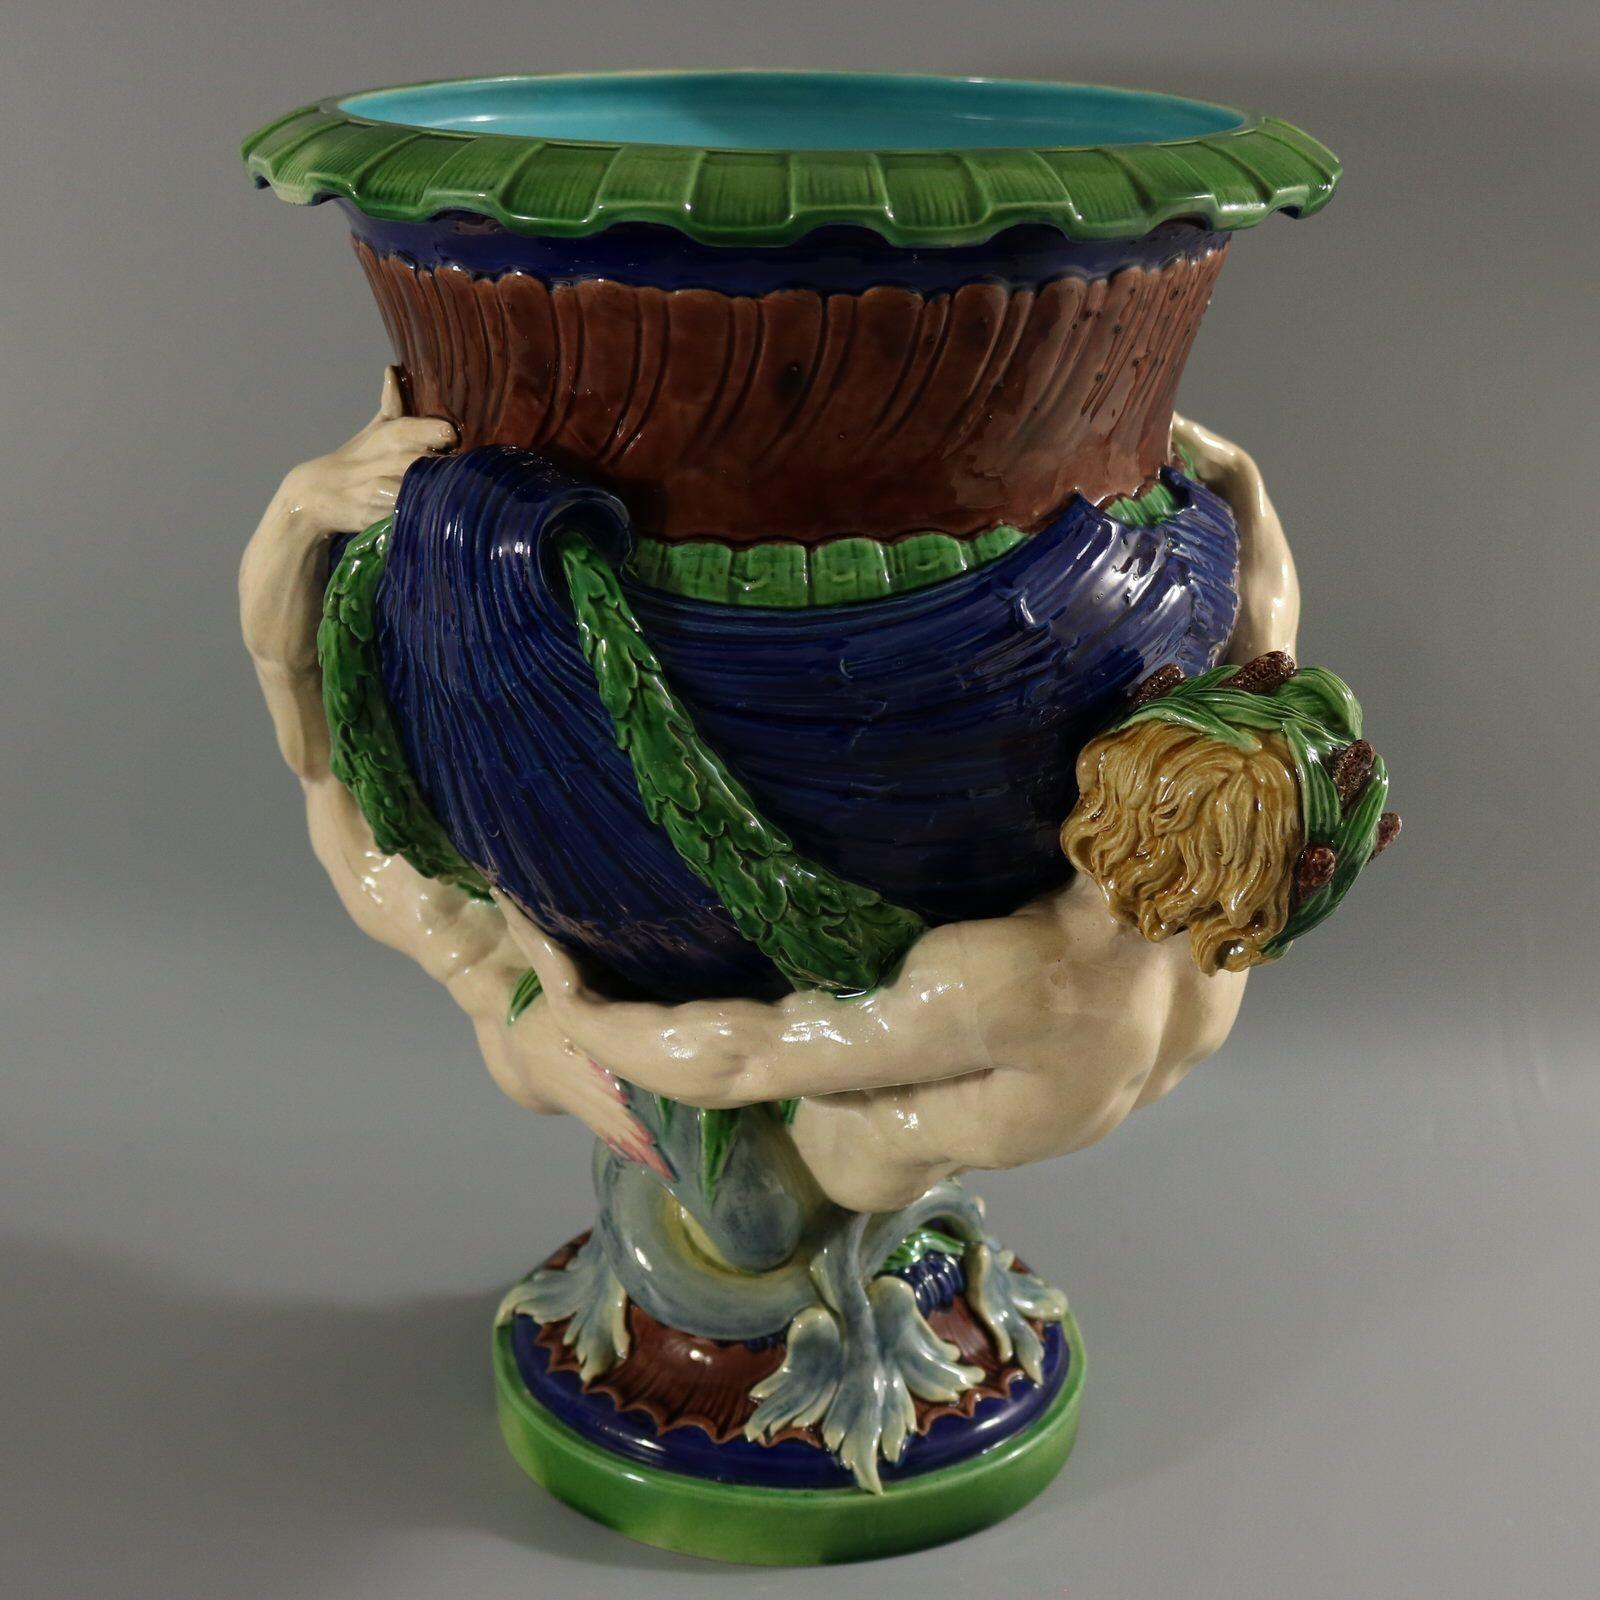 Minton Majolica jardinière with a mythological theme which features two mermen (sometimes attributed to the Sea God Neptune or to Triton), supporting shells. Cobalt blue ground version, with turquoise interior. Colouration: cobalt blue, green,